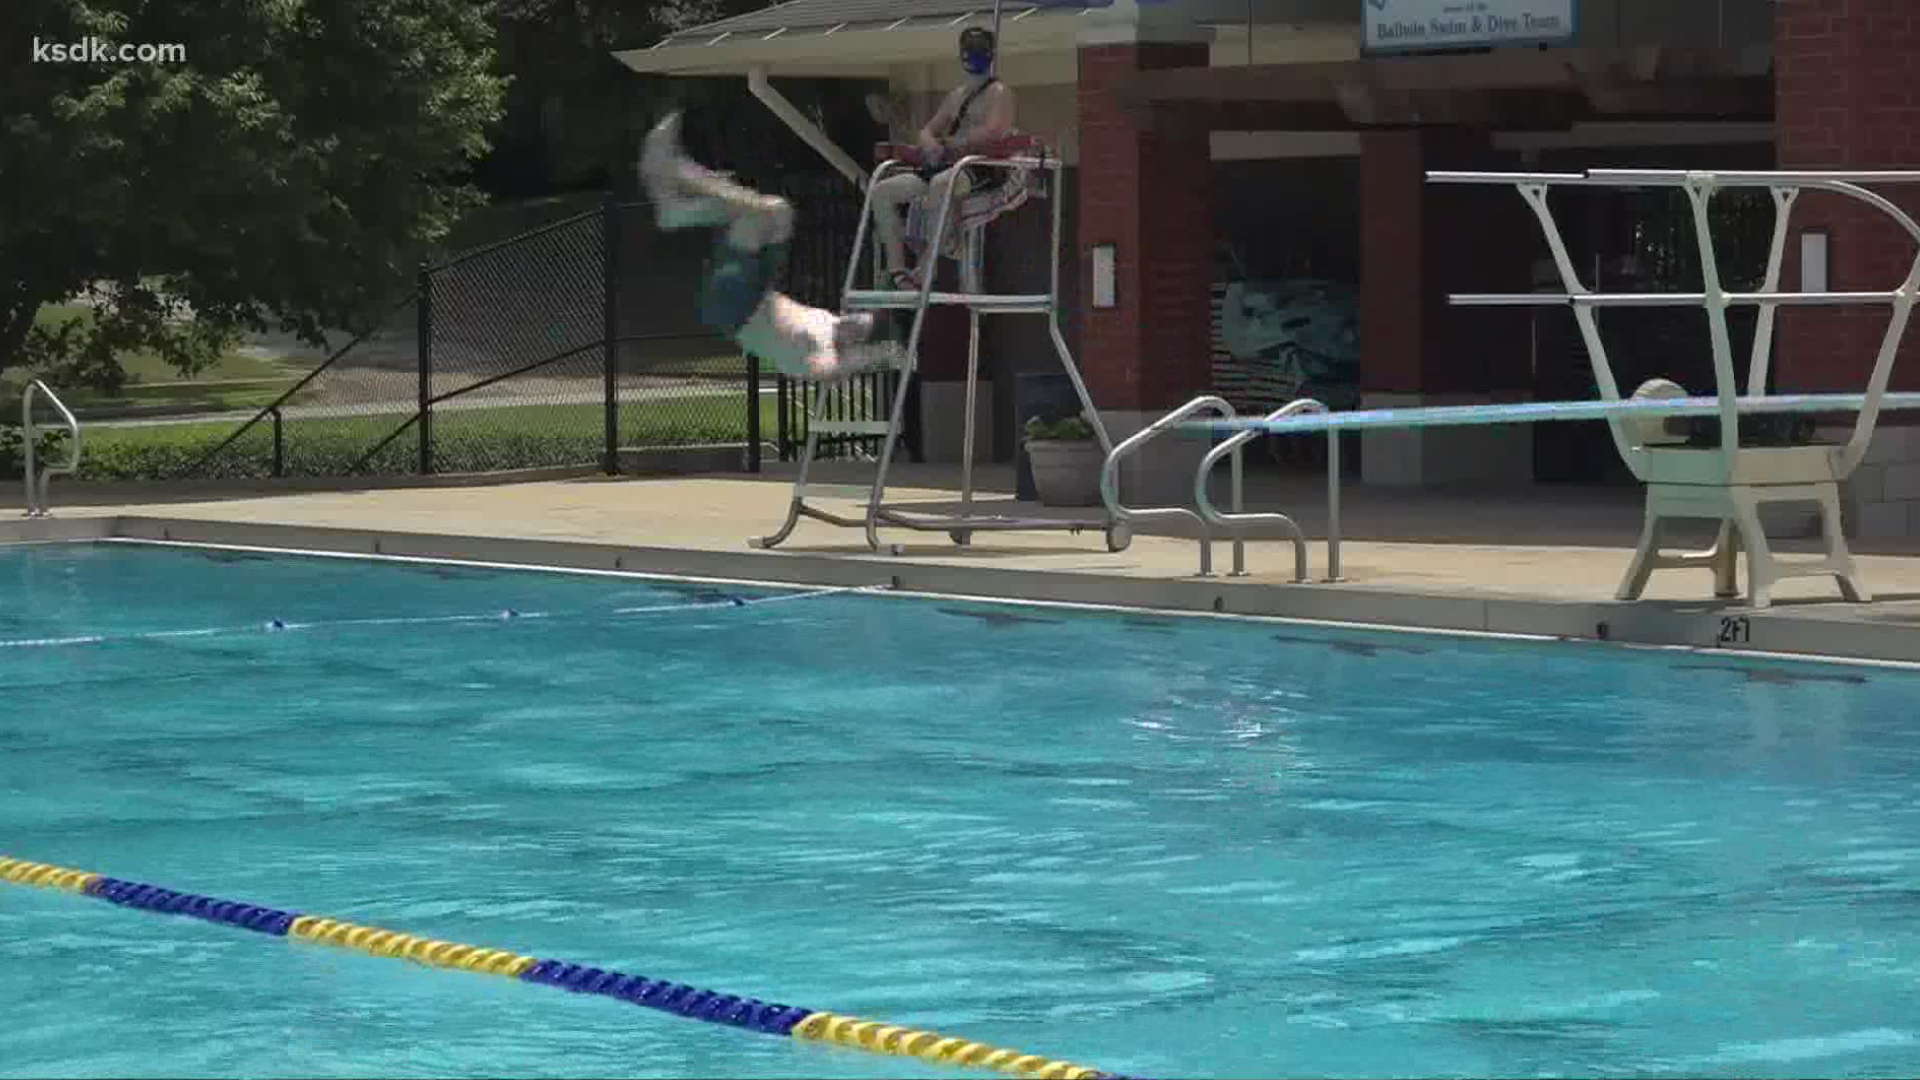 The sounds of splishing and splashing can be heard around public pools in St. Louis county again.